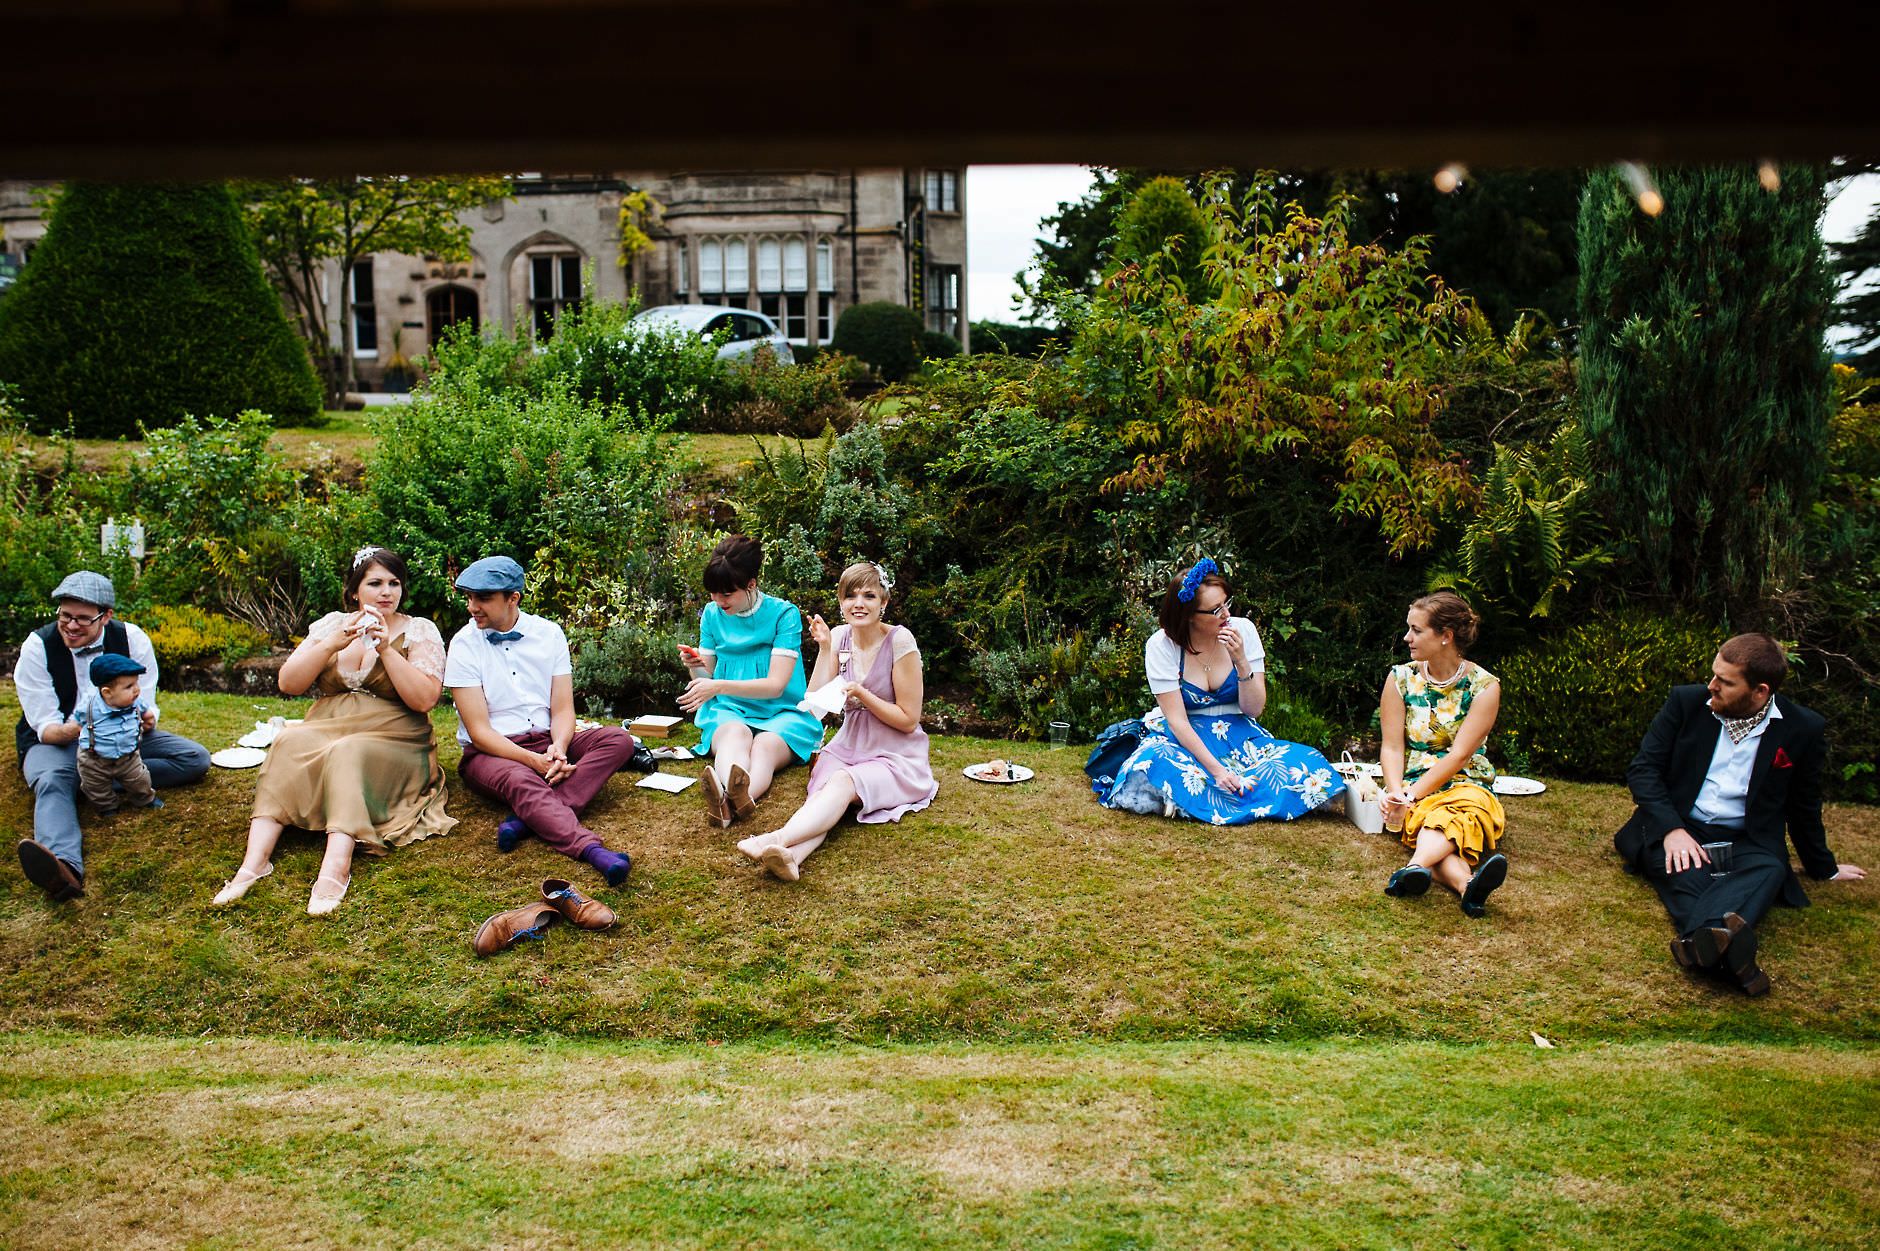 guests in vintage dress sat on a grass bank